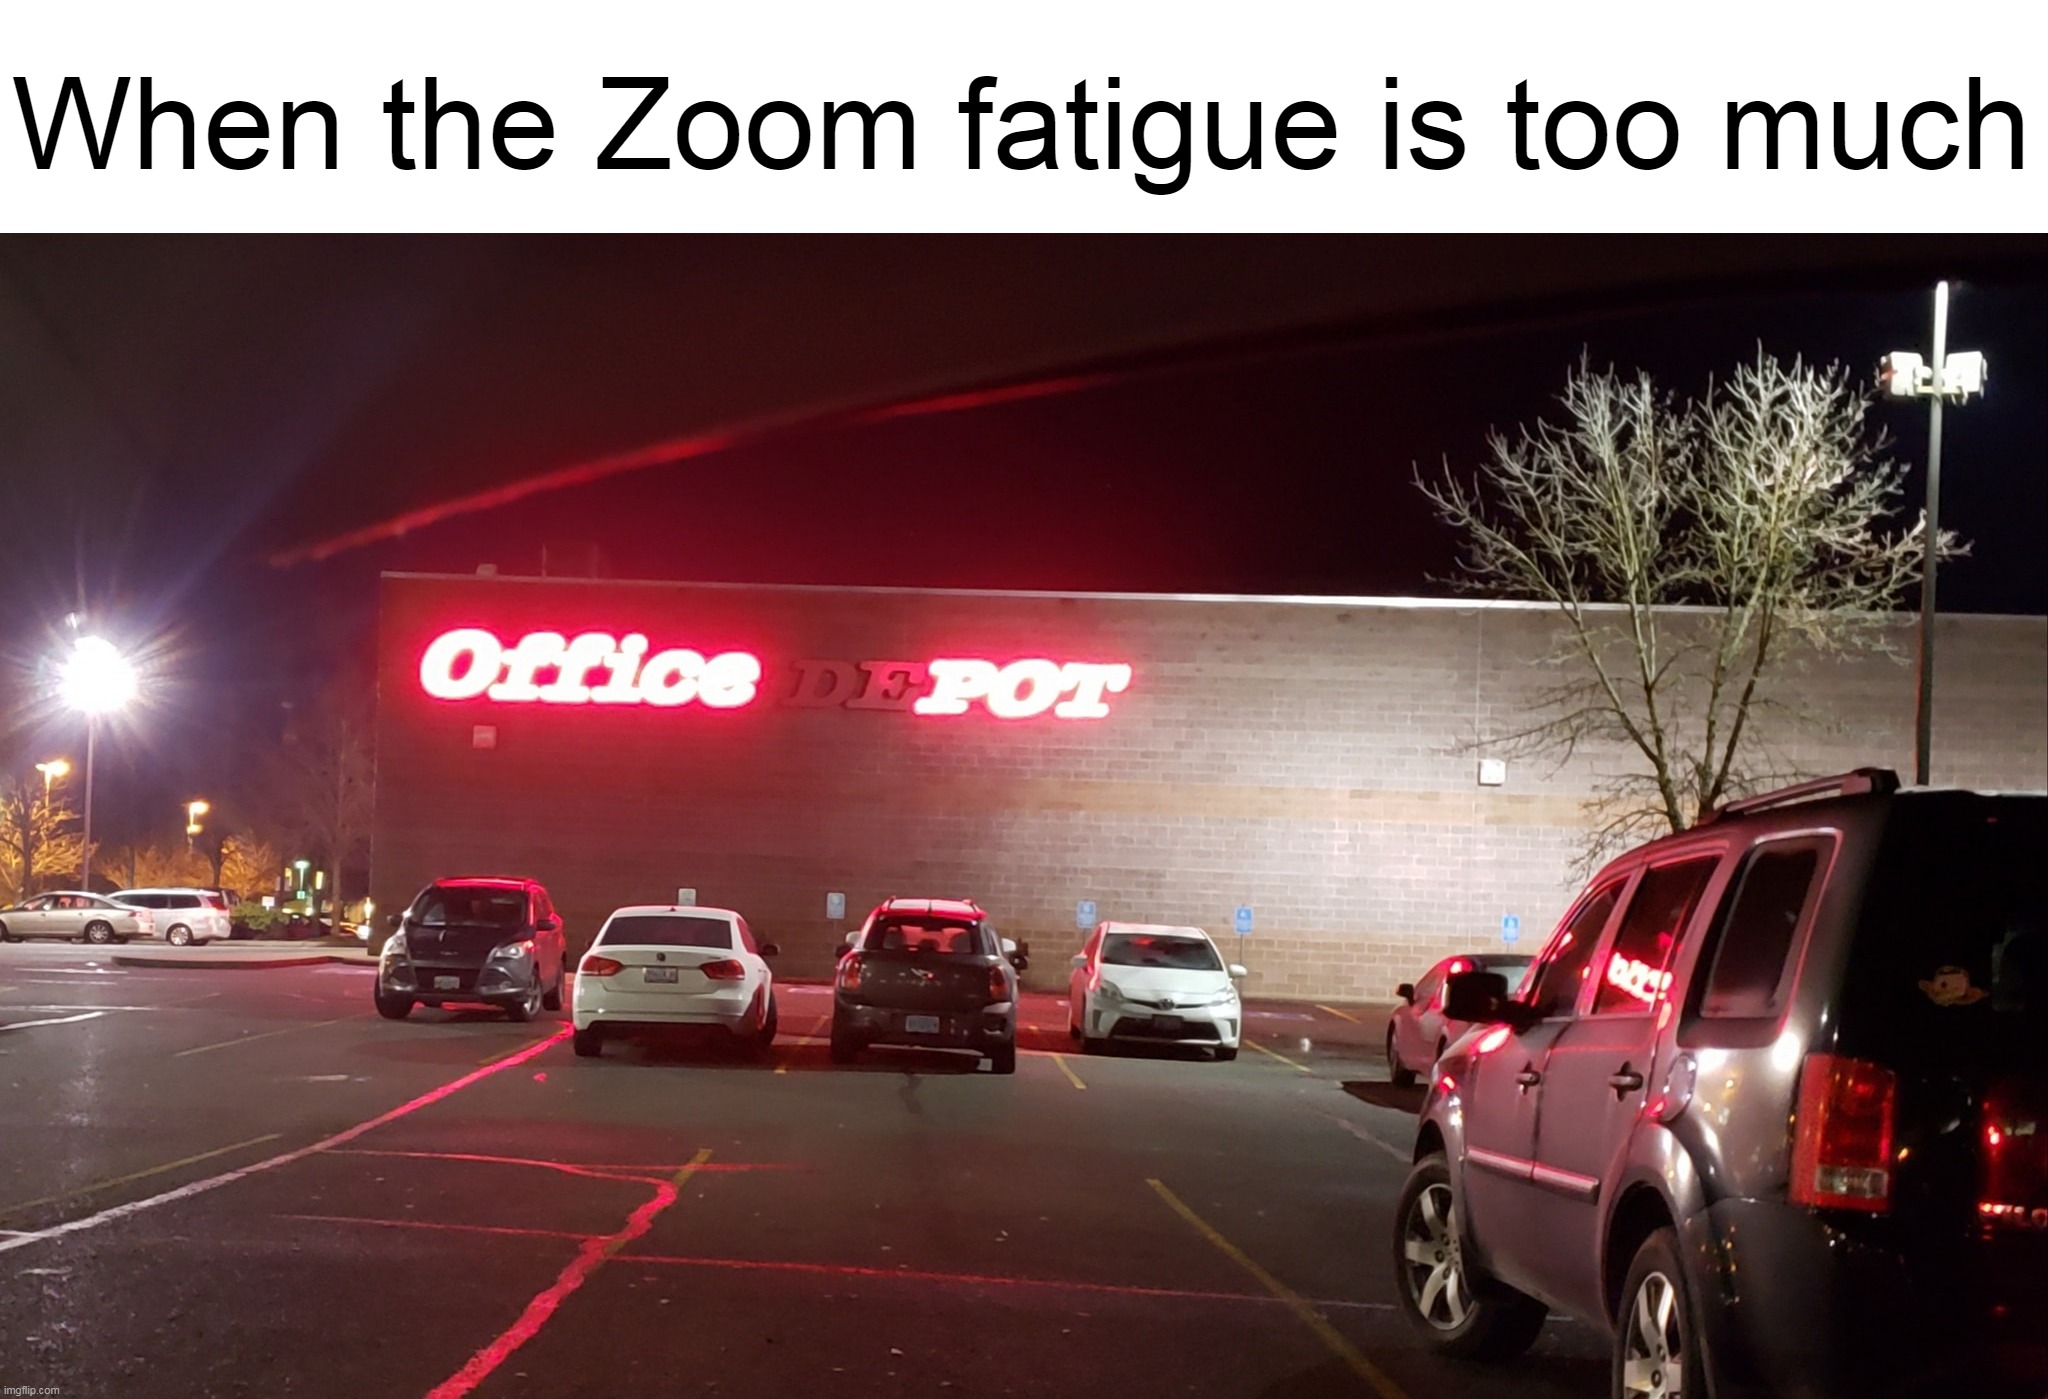 Someone's Favorite Store by Far | When the Zoom fatigue is too much | image tagged in meme,memes,humor,dark humor,signs | made w/ Imgflip meme maker